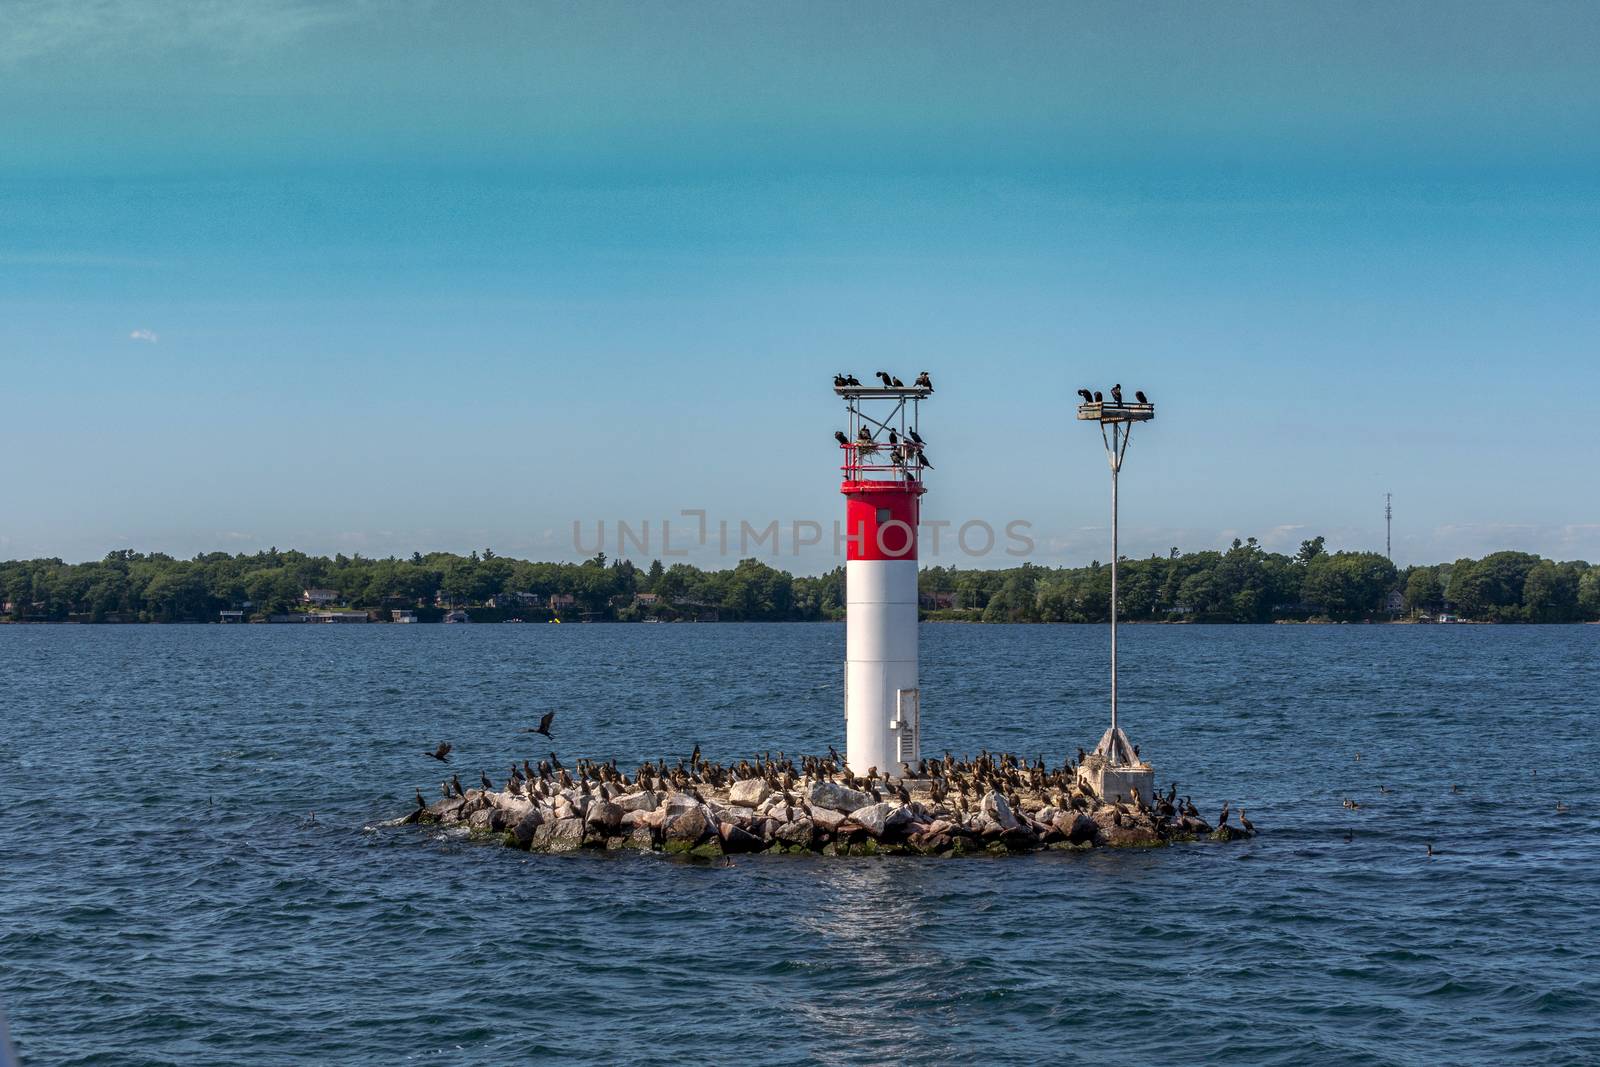 The island occupied by cormorants by ben44